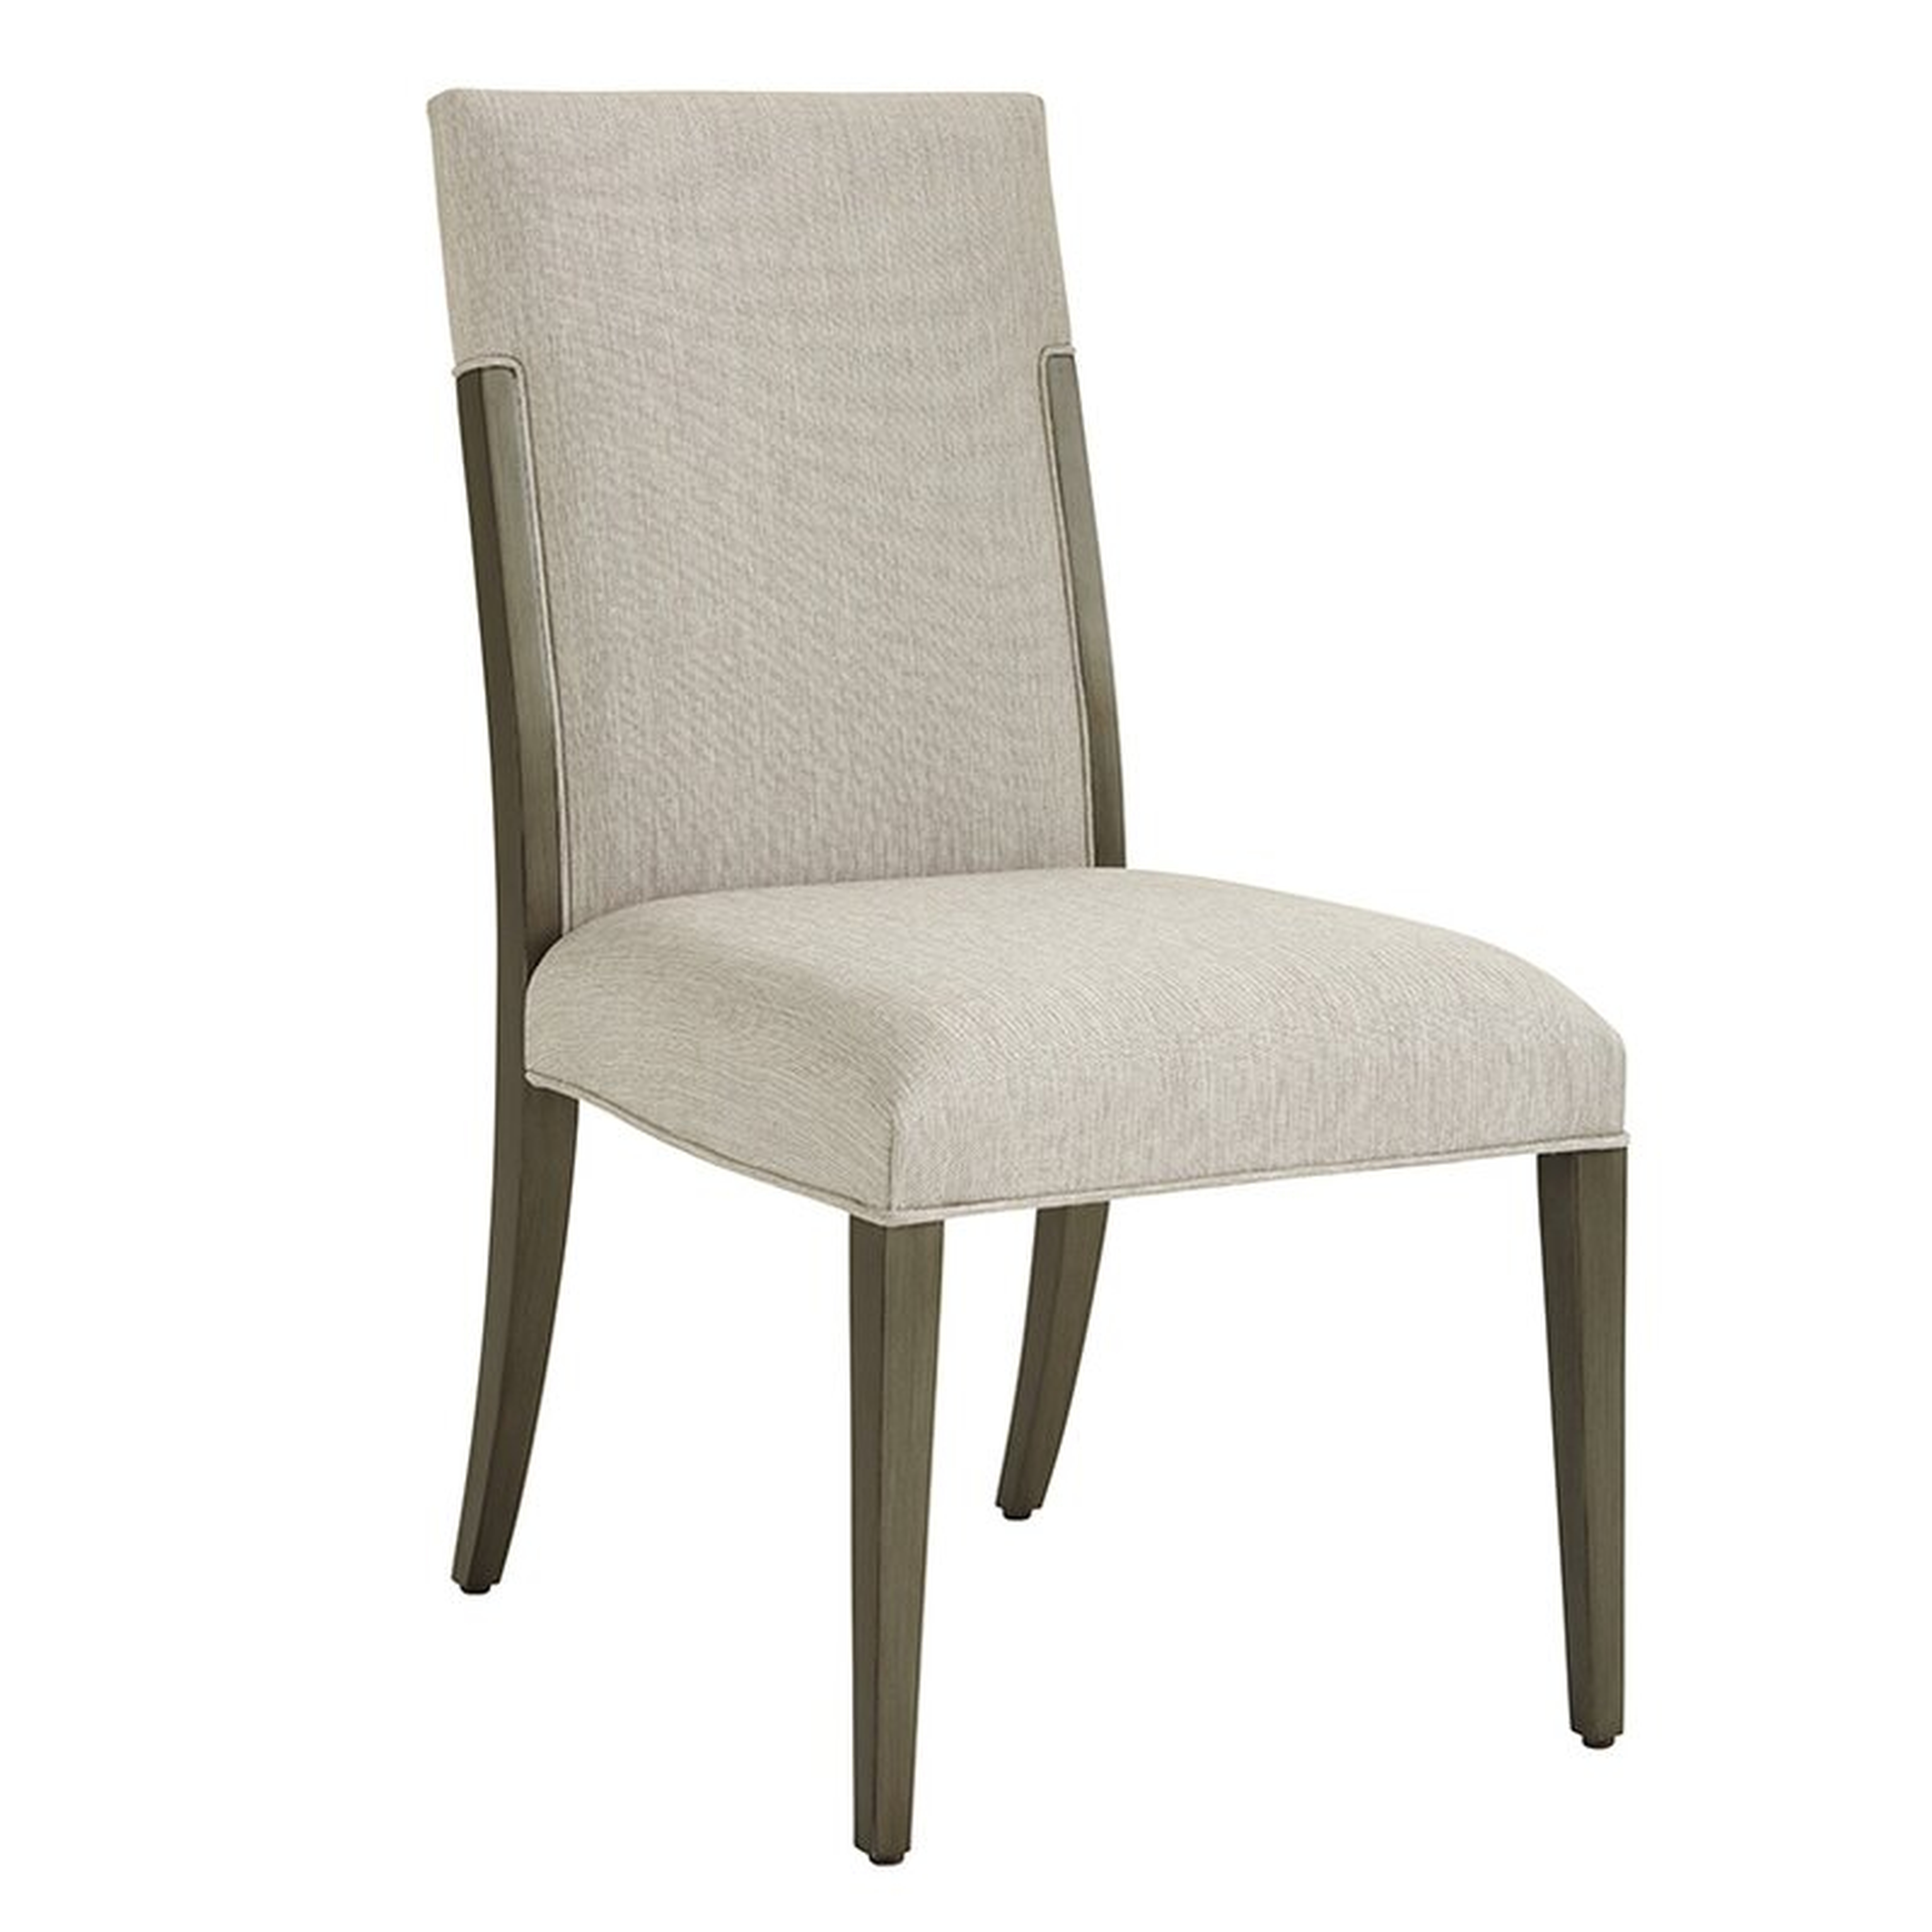 Lexington Ariana Saverne Upholstered Side Chair - Perigold